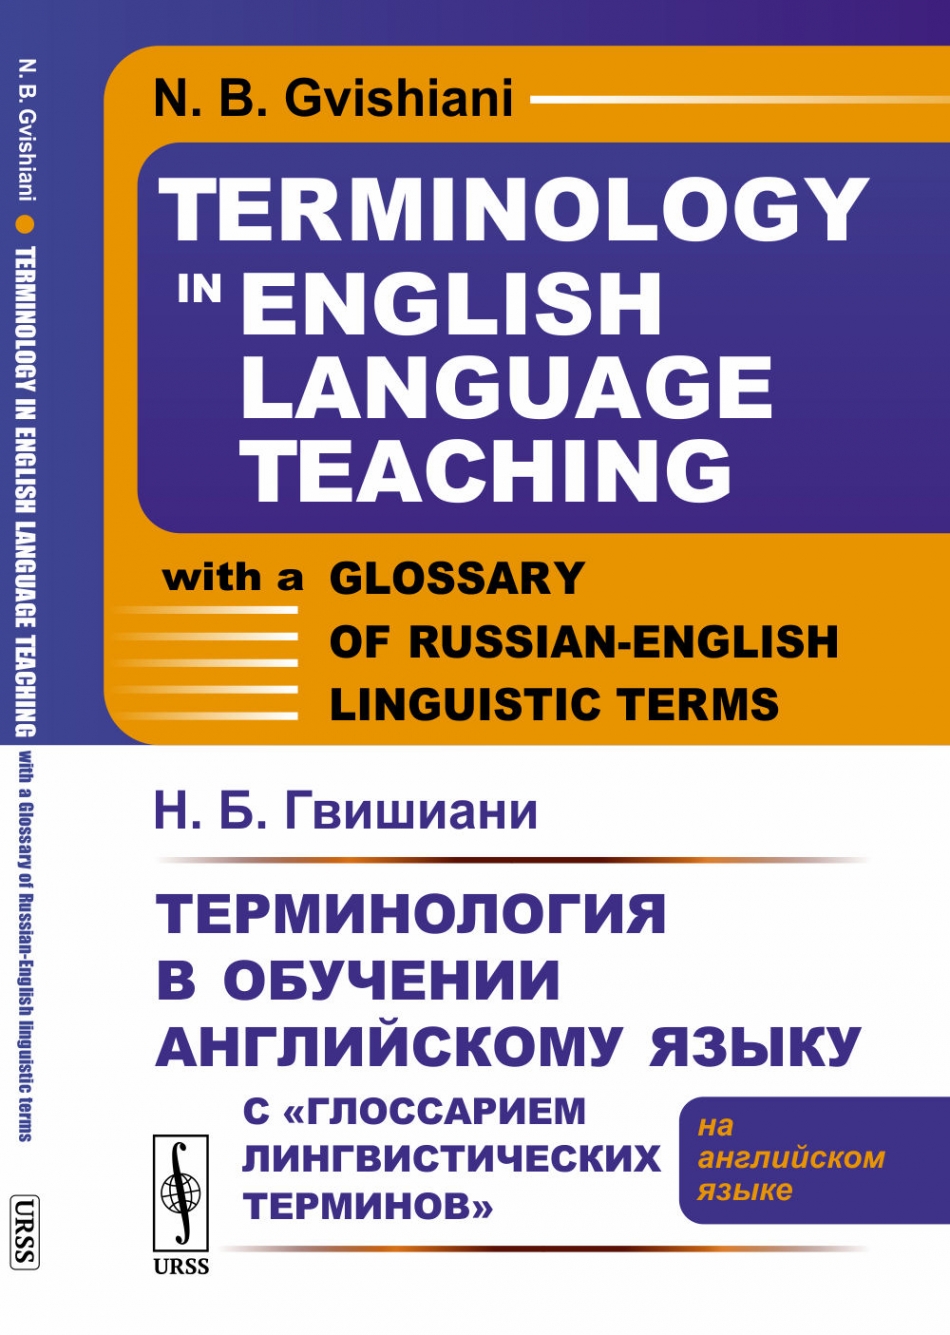  ..         : (  ) // Terminology in English Language Teaching with a Glossary of Russian-English linguistic terms 